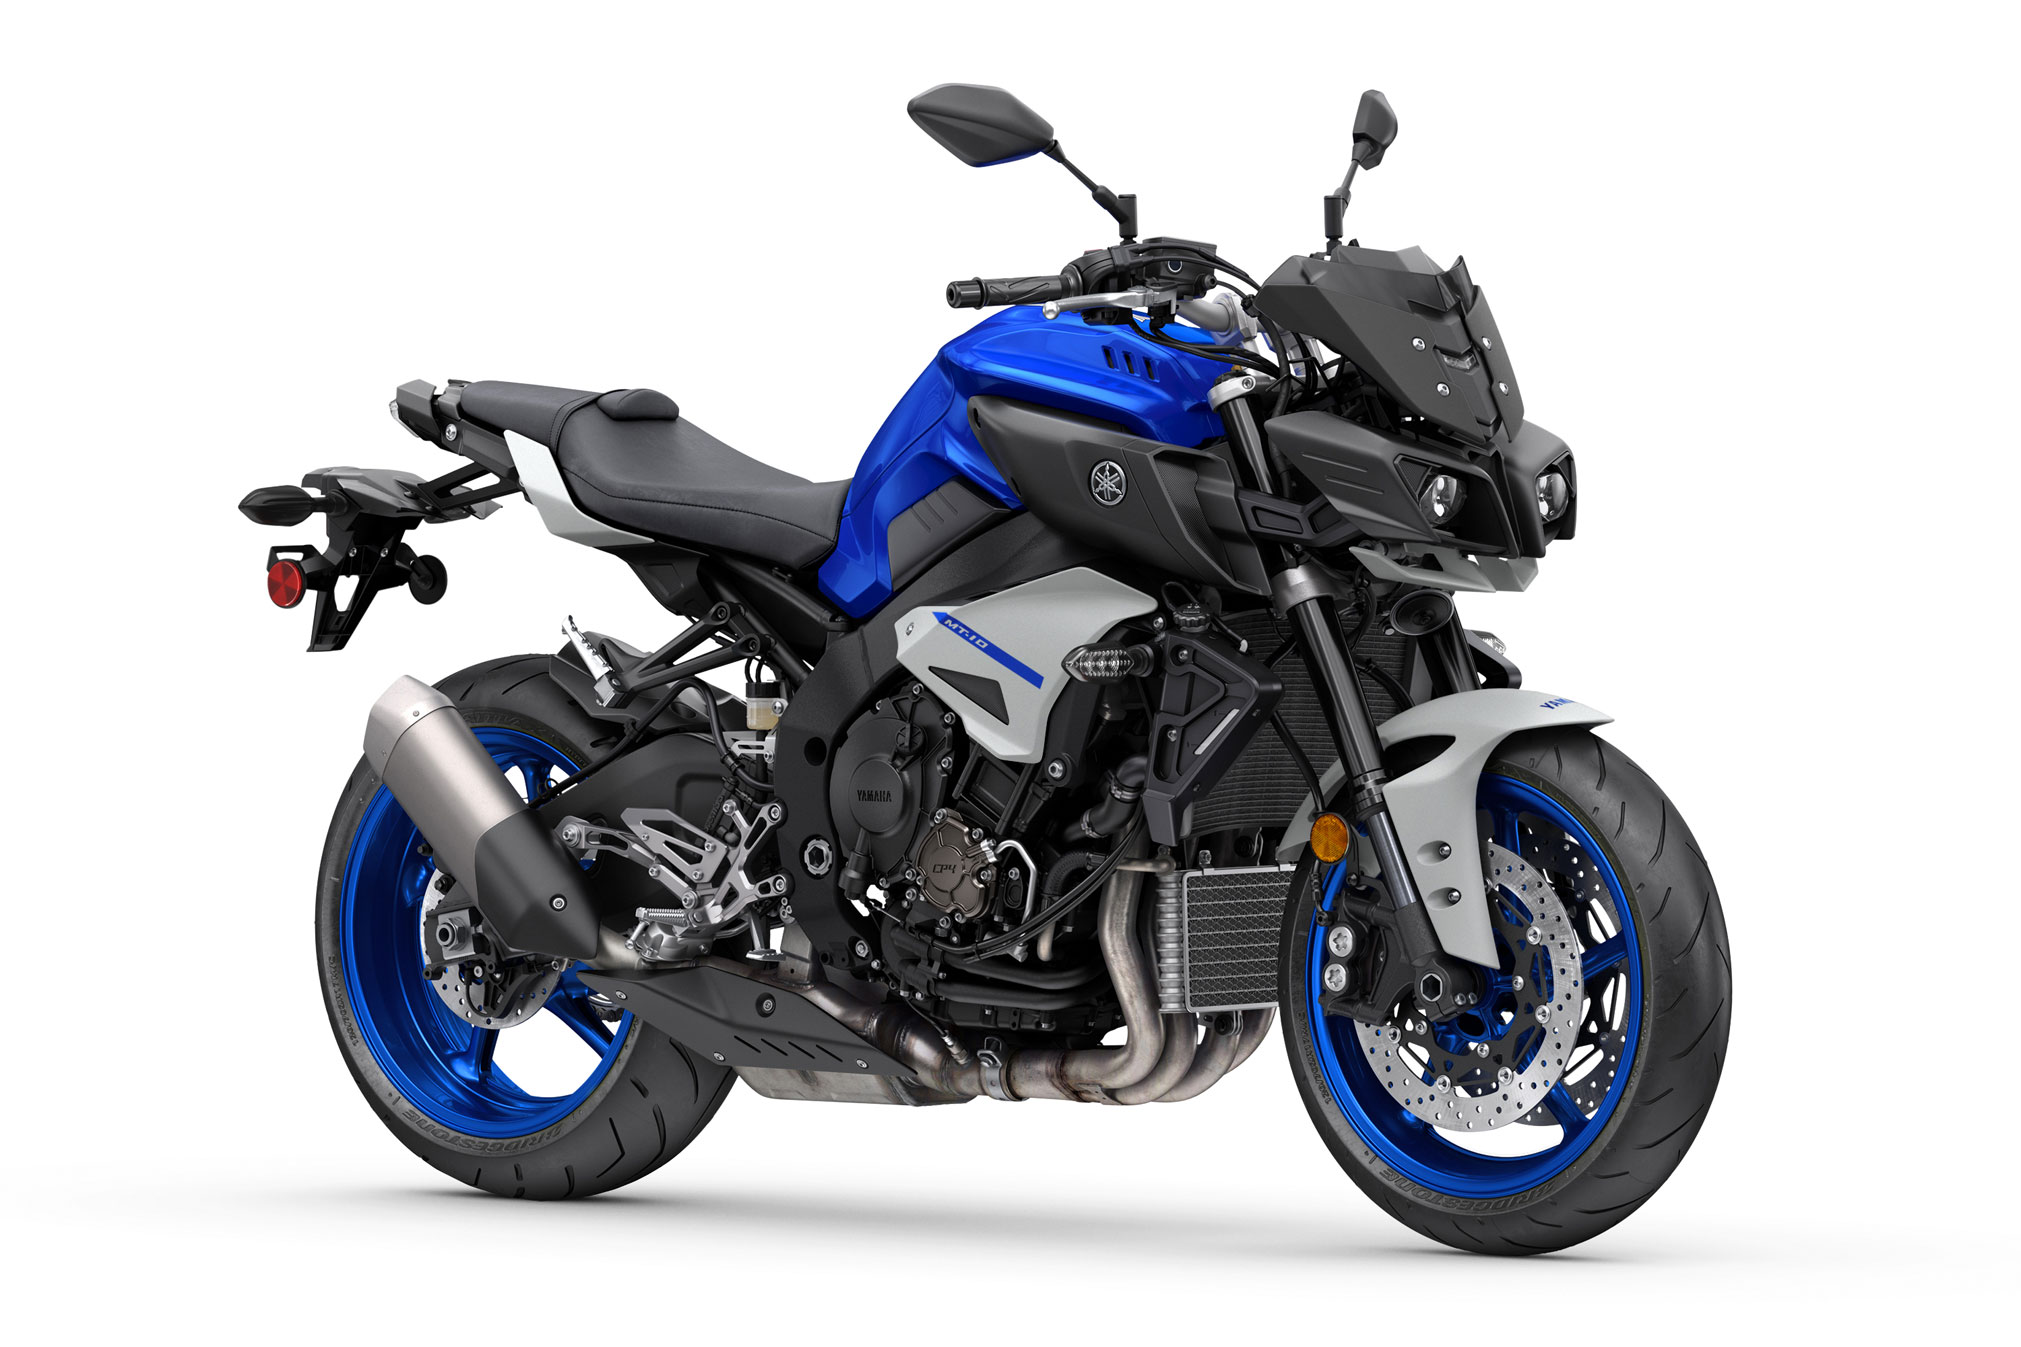 2021 Yamaha MT10 Guide • Total Motorcycle